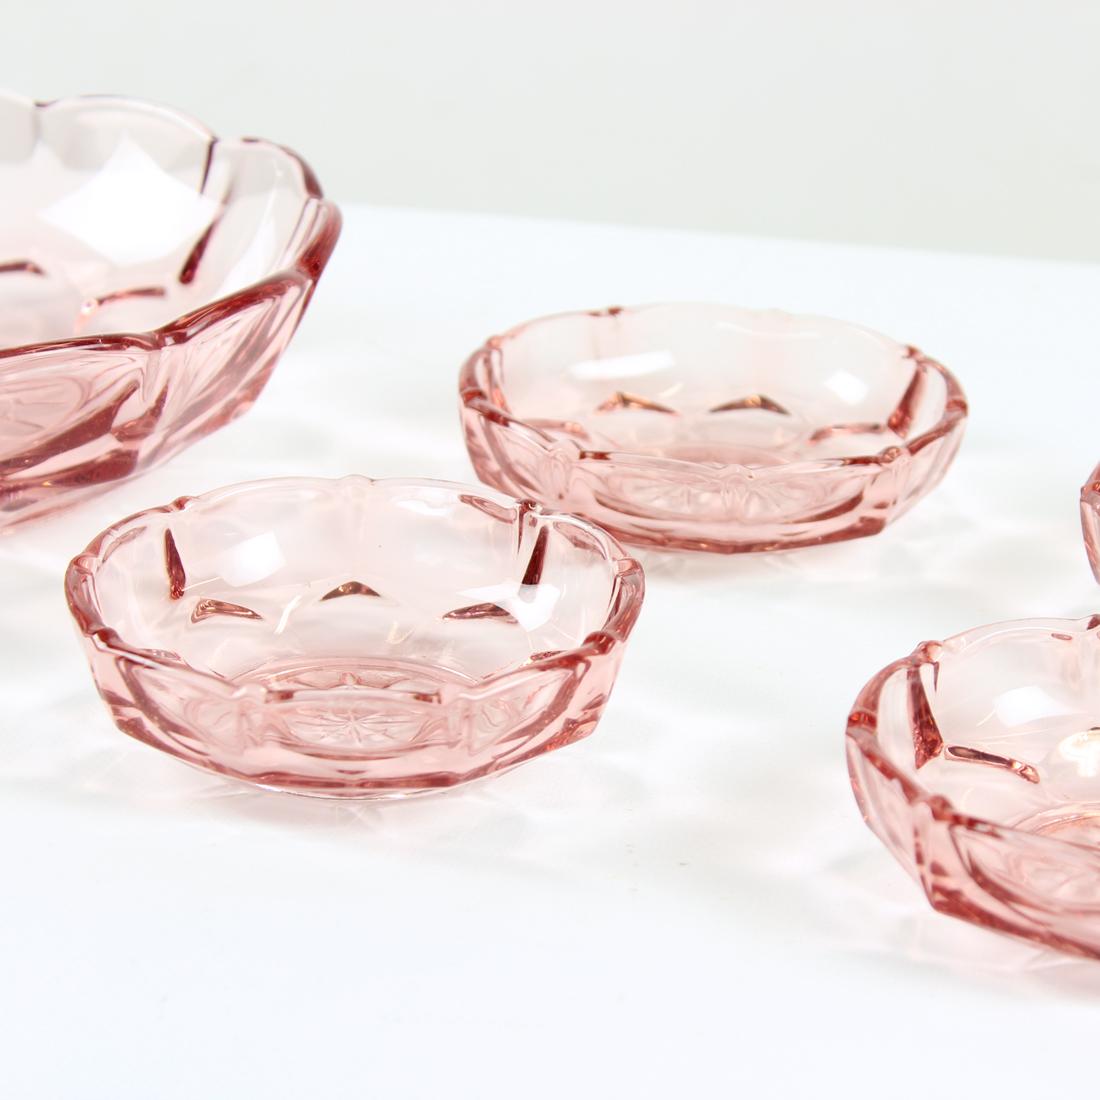 Beautiful set of five bowls produced in pressed glass in a lovely rose colored glass. The set can be used in the house, or in kitchen for daily use. Marked as Made in Czechoslovakia. The bowls were produced in 1950s. Beautiful set, ready to enhance